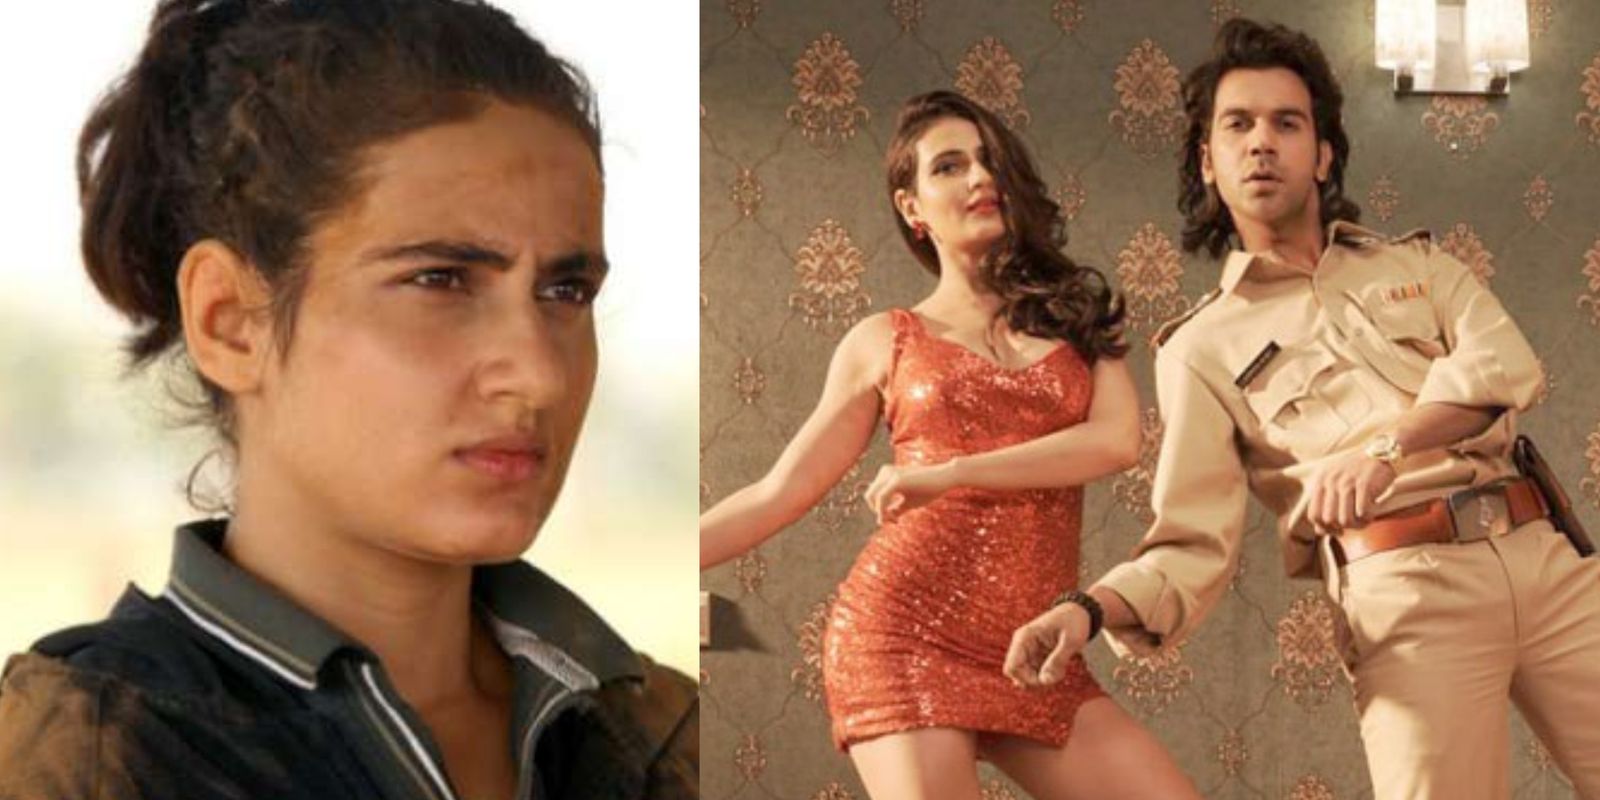 Fatima Sana Shaikh Proves Her Versatility As An Actor With Quirky Avatar In Ludo